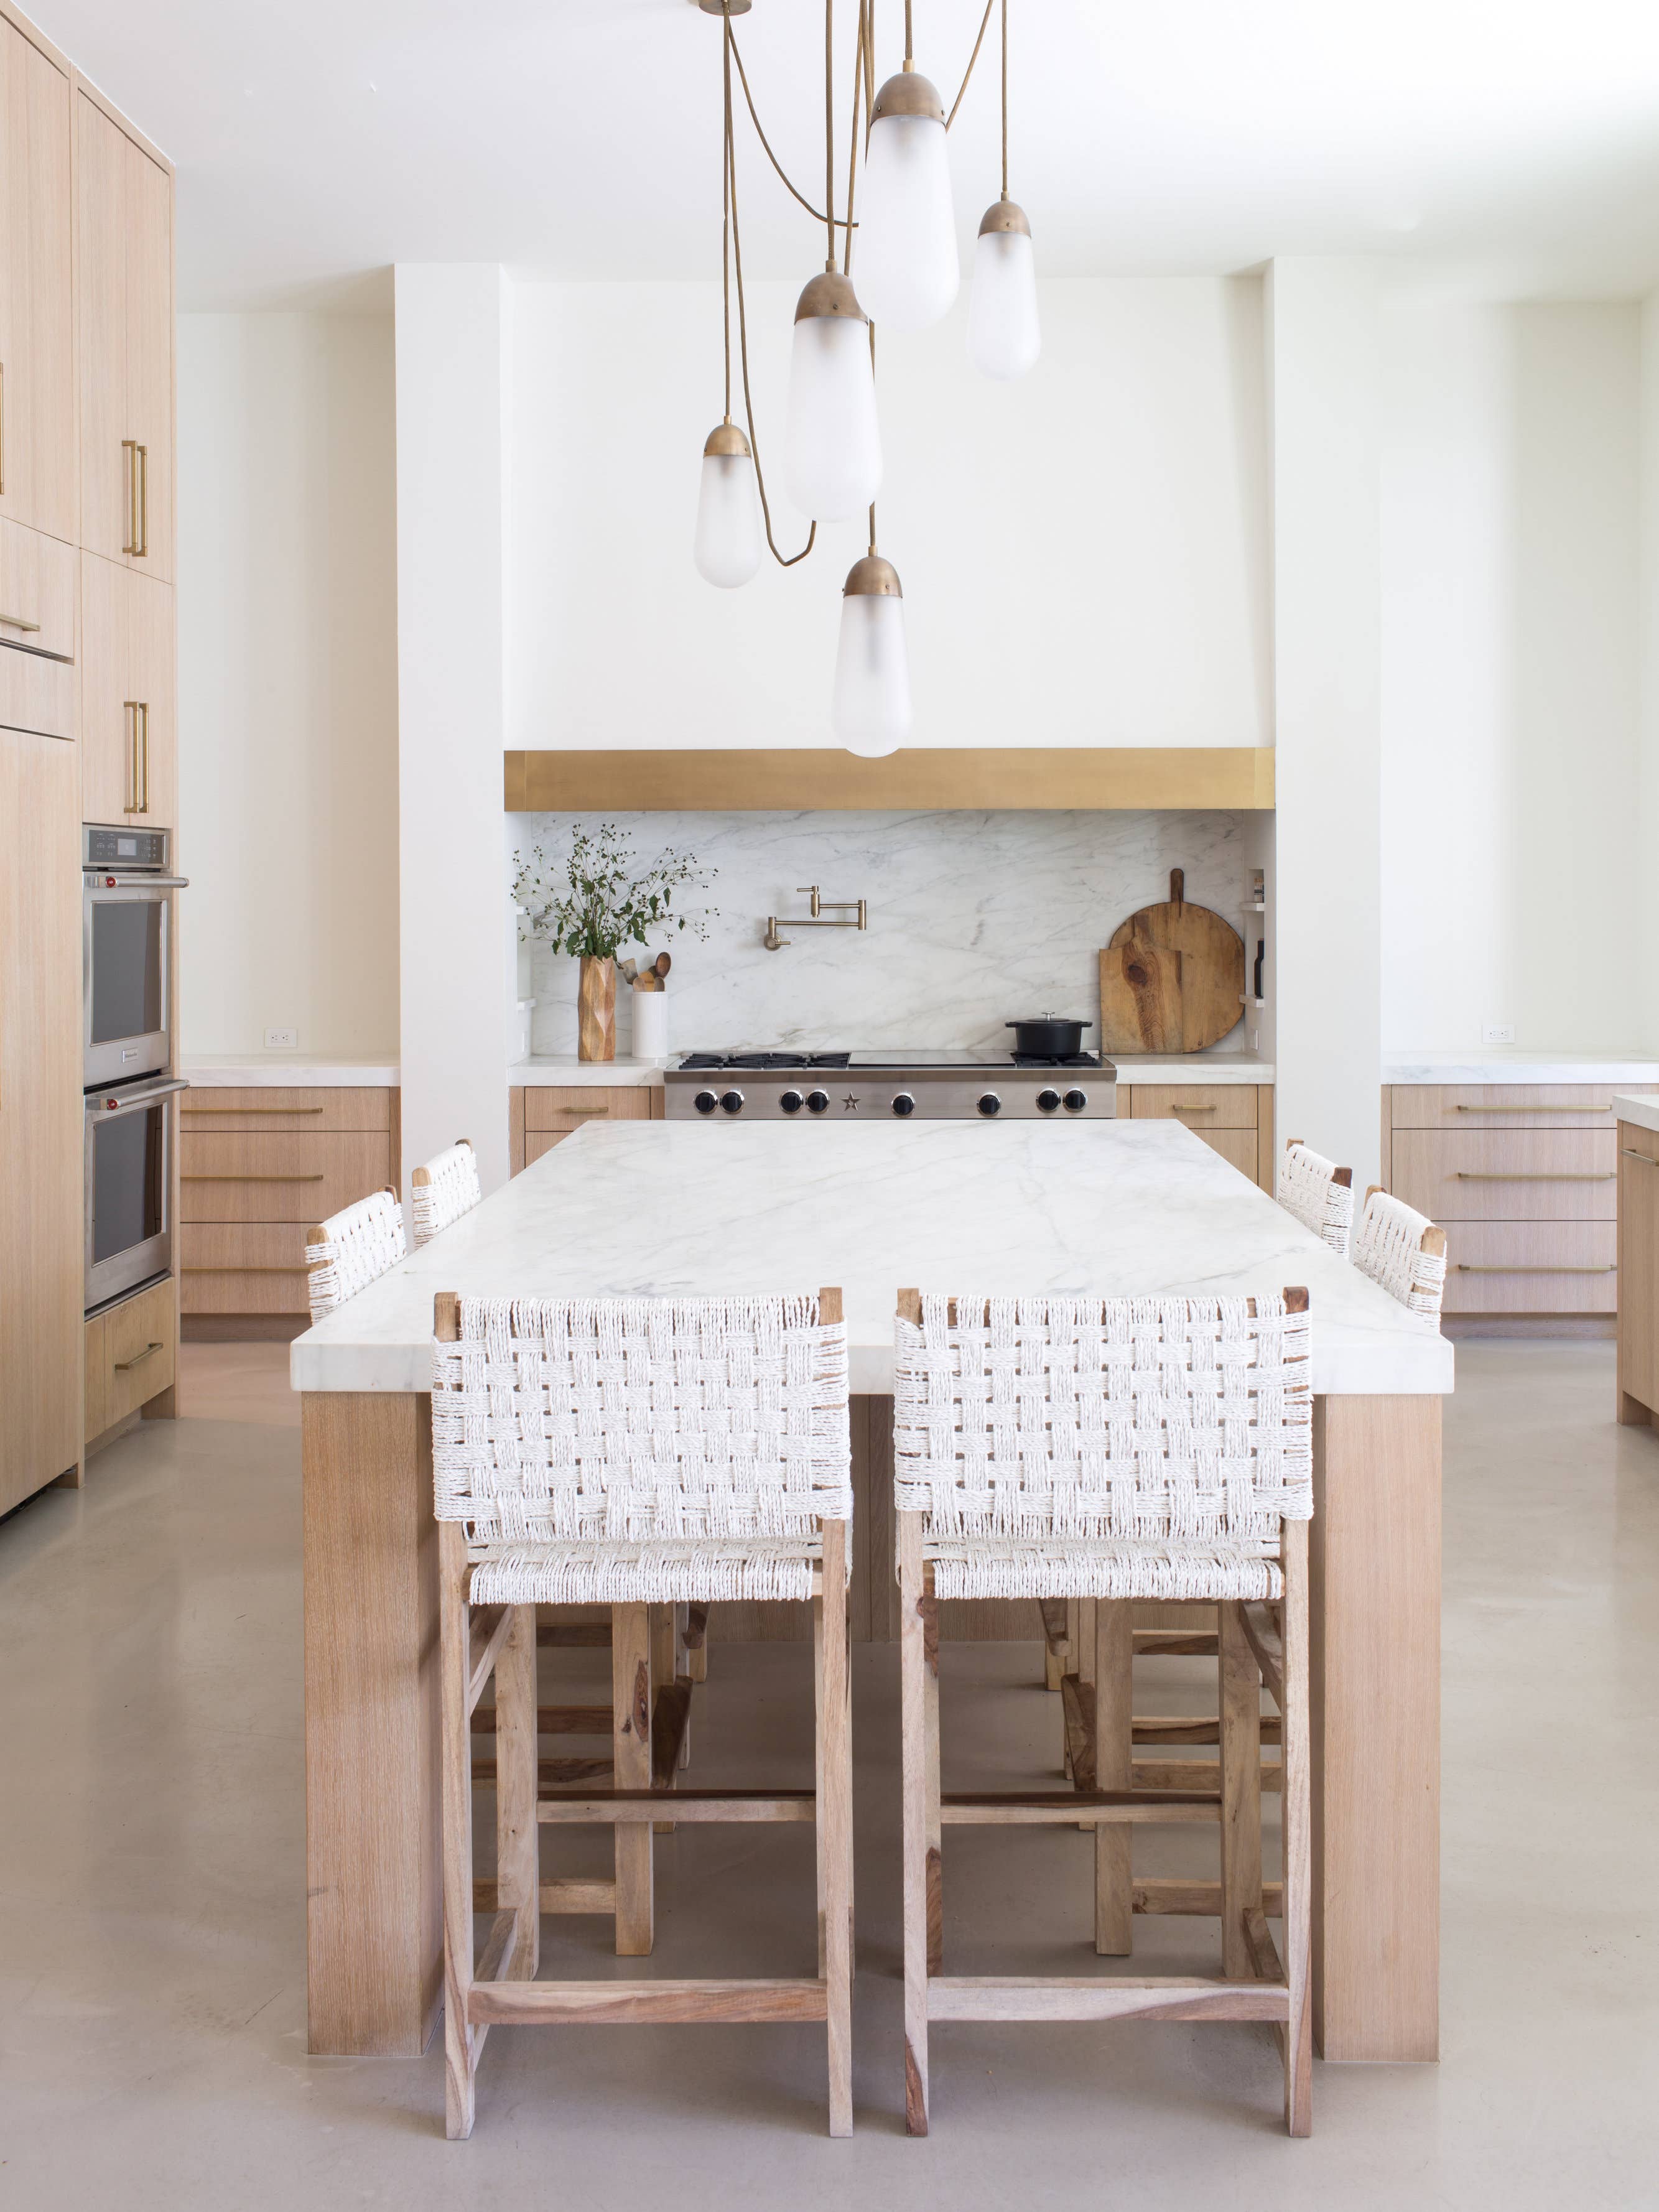 This Designer Isn’t a Fan of Upper Kitchen Cabinets—Here’s Why